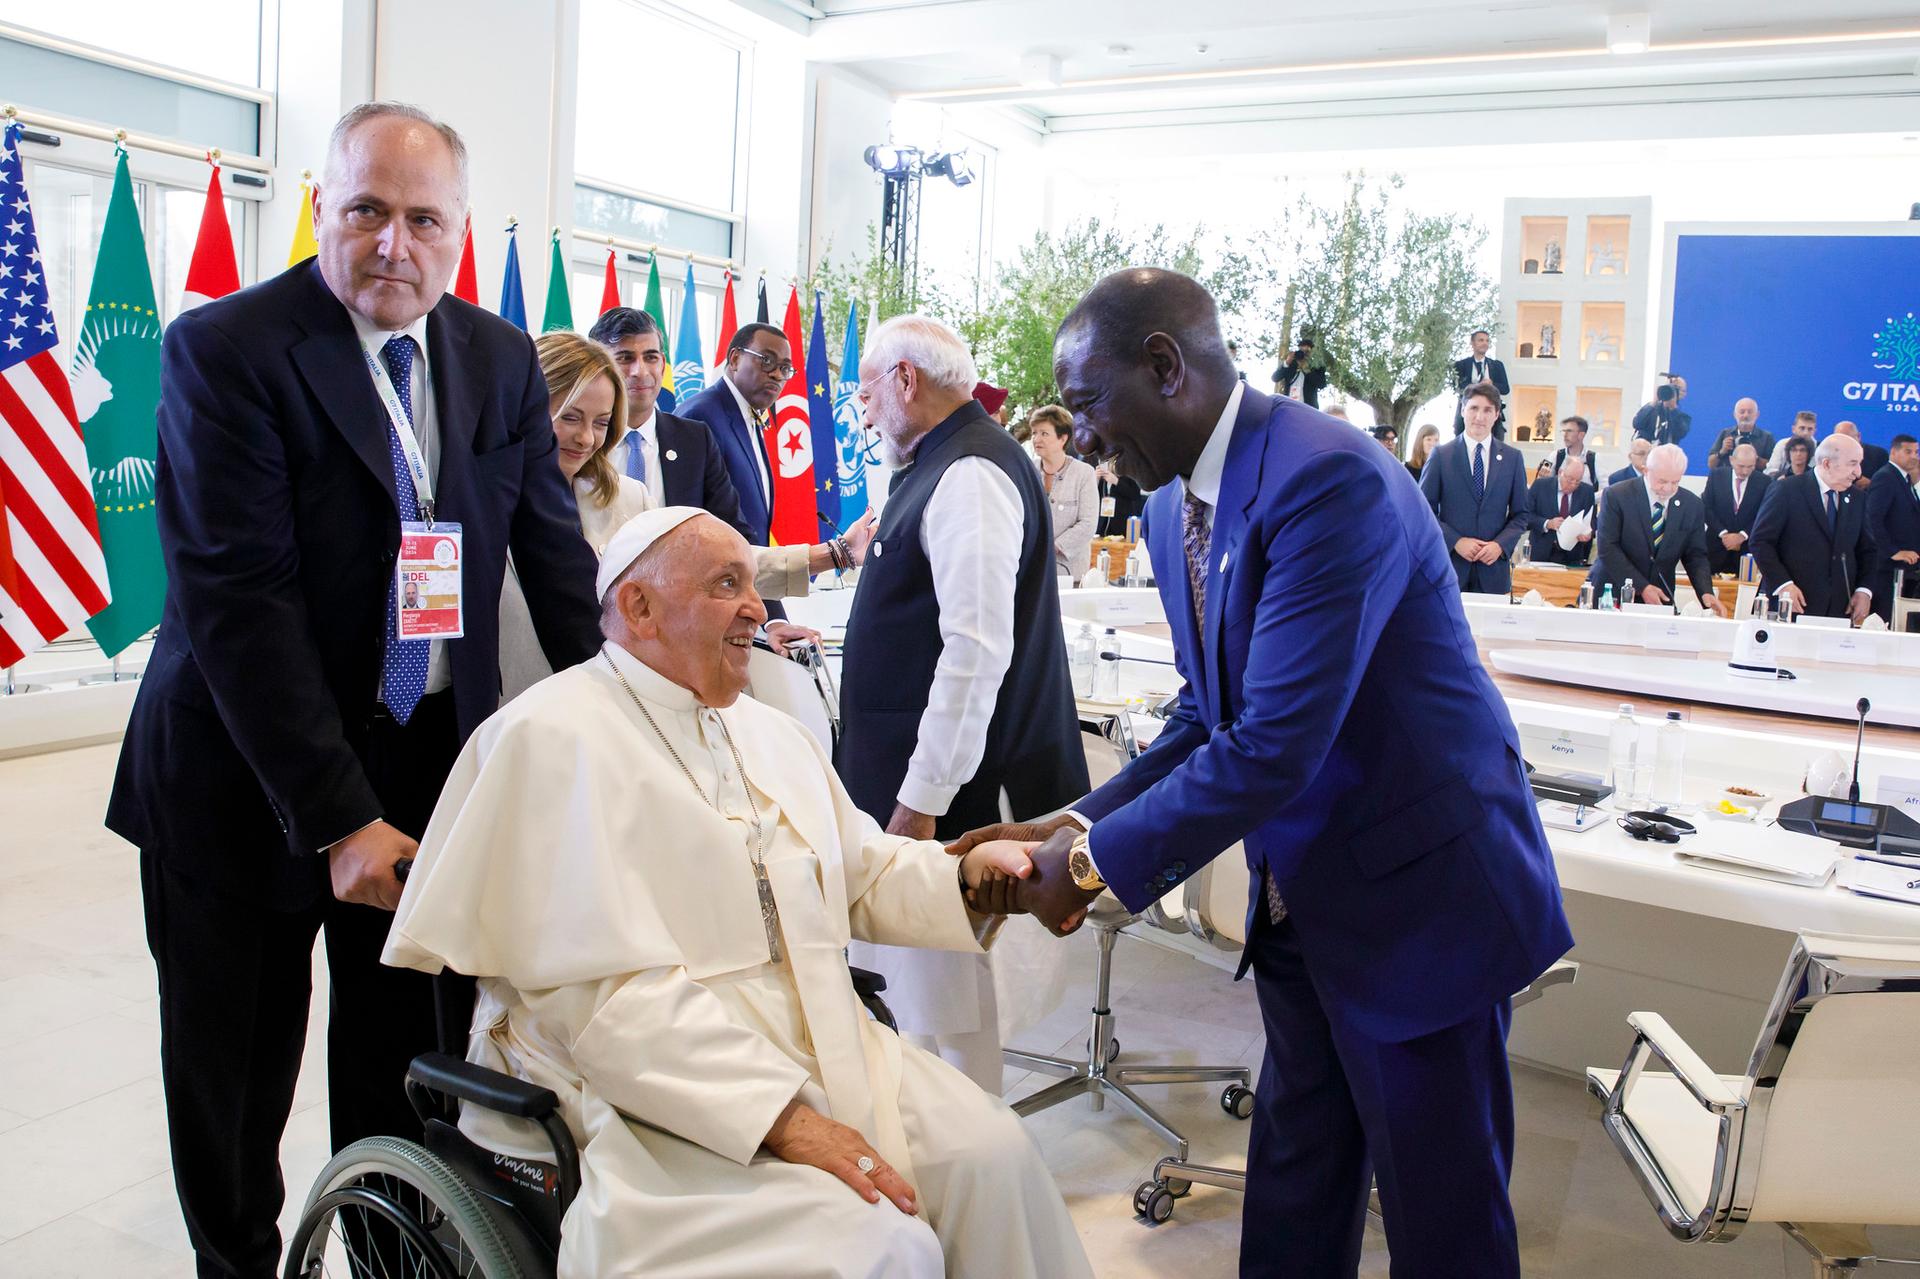 Kenya president joins Pope Francis in calling for end of conflicts in Africa